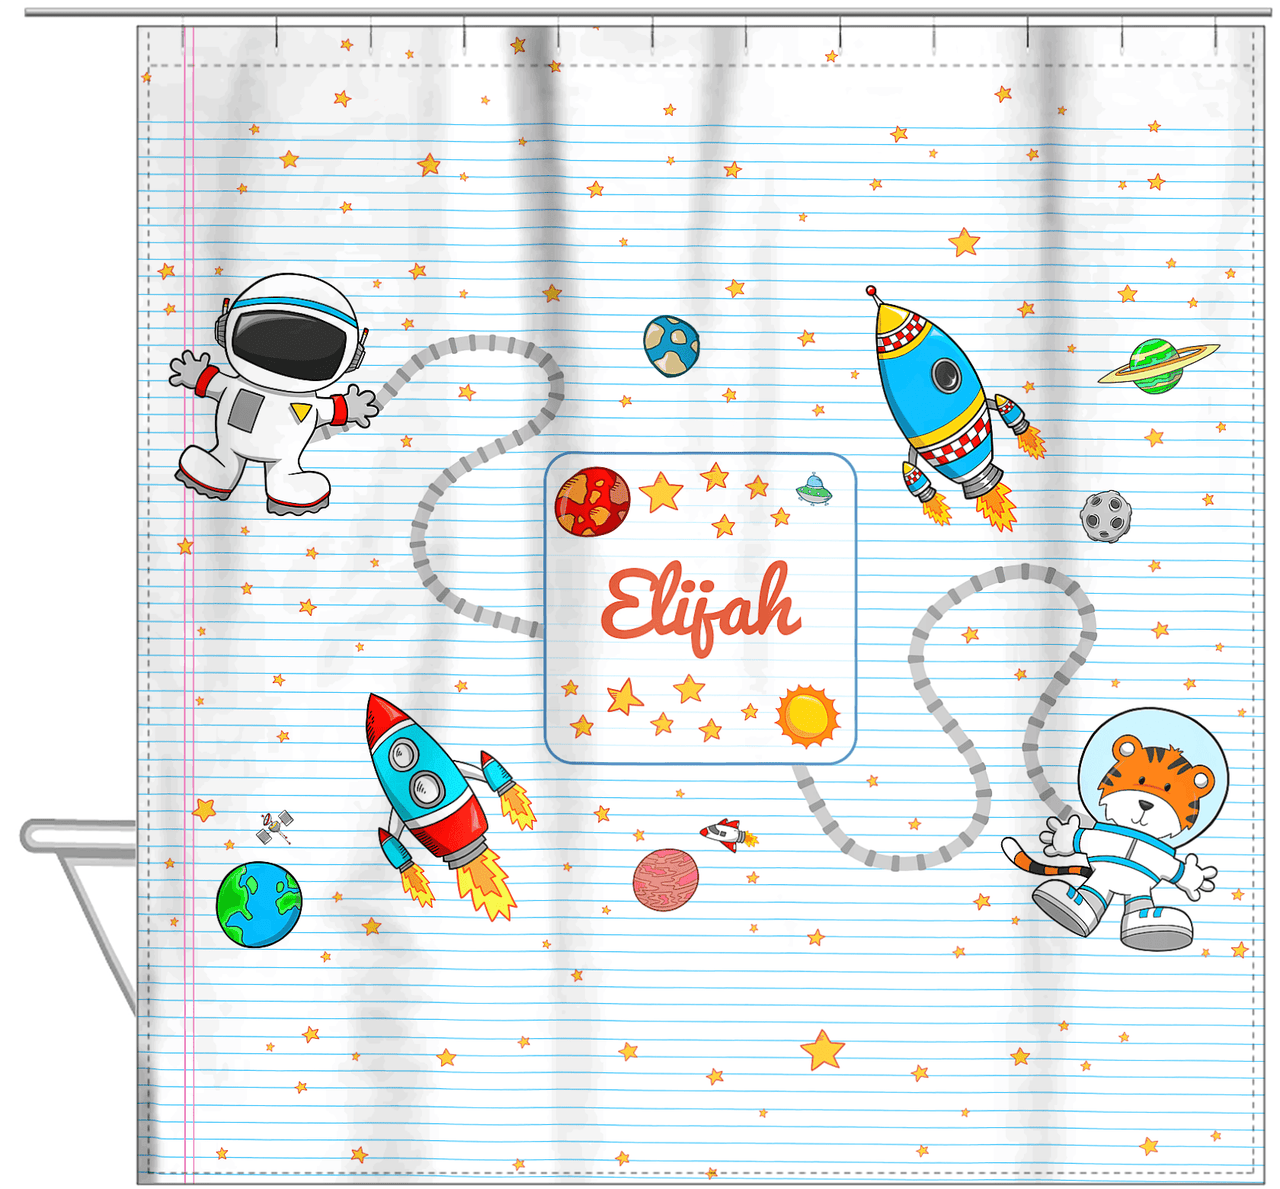 Personalized Rocket Ship Shower Curtain I - Star Tiger - White Background - Hanging View